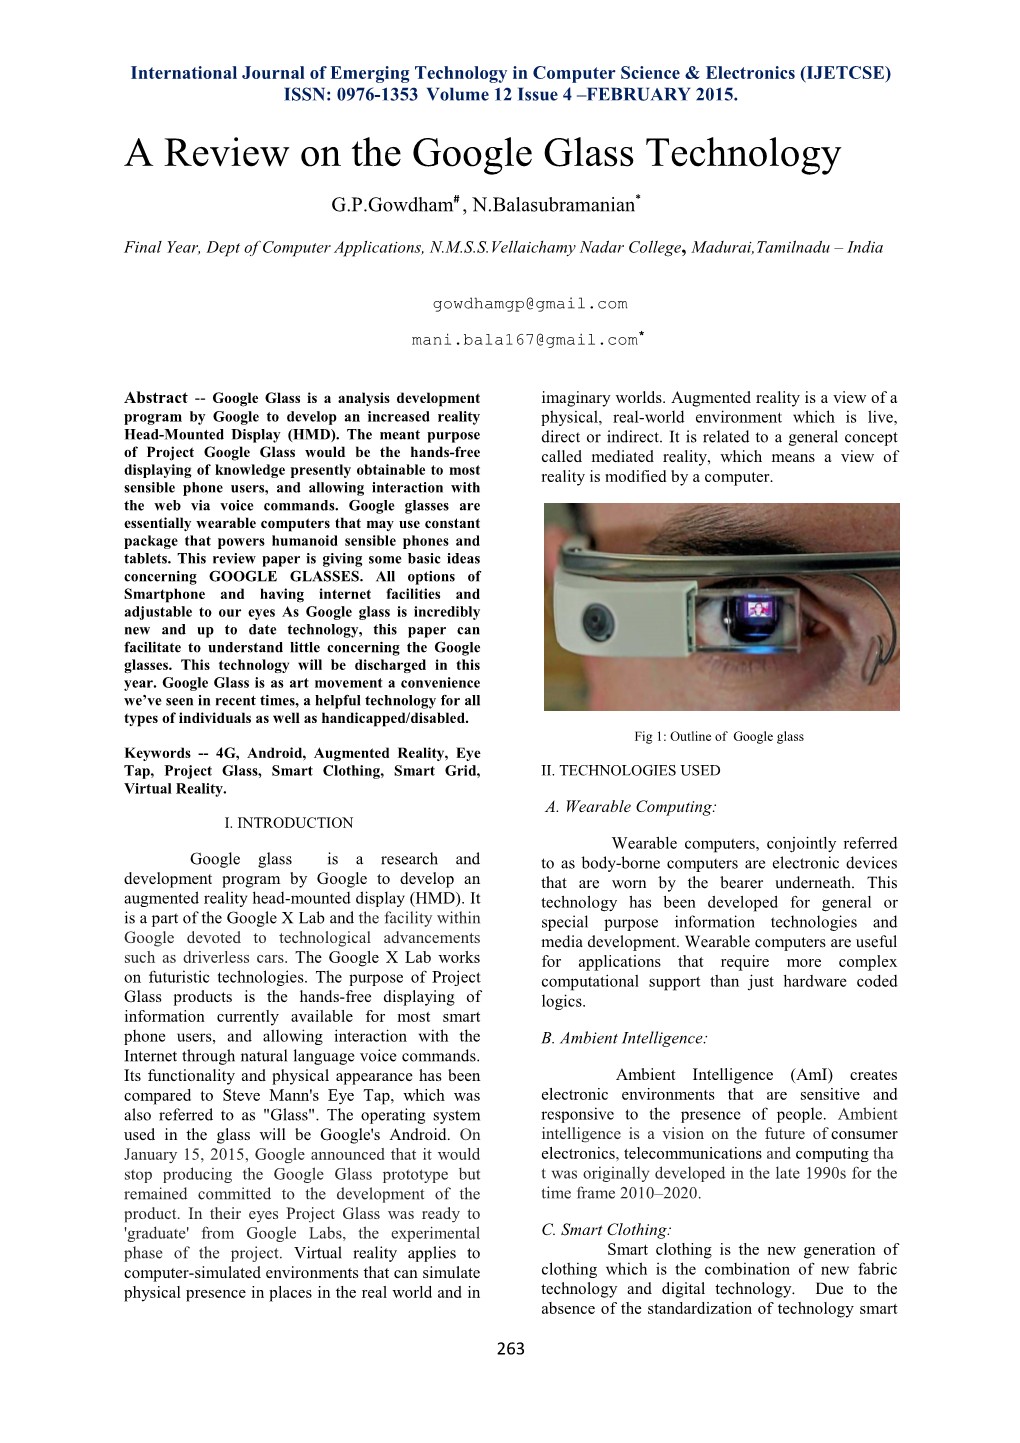 A Review on the Google Glass Technology G.P.Gowdham # , N.Balasubramanian *